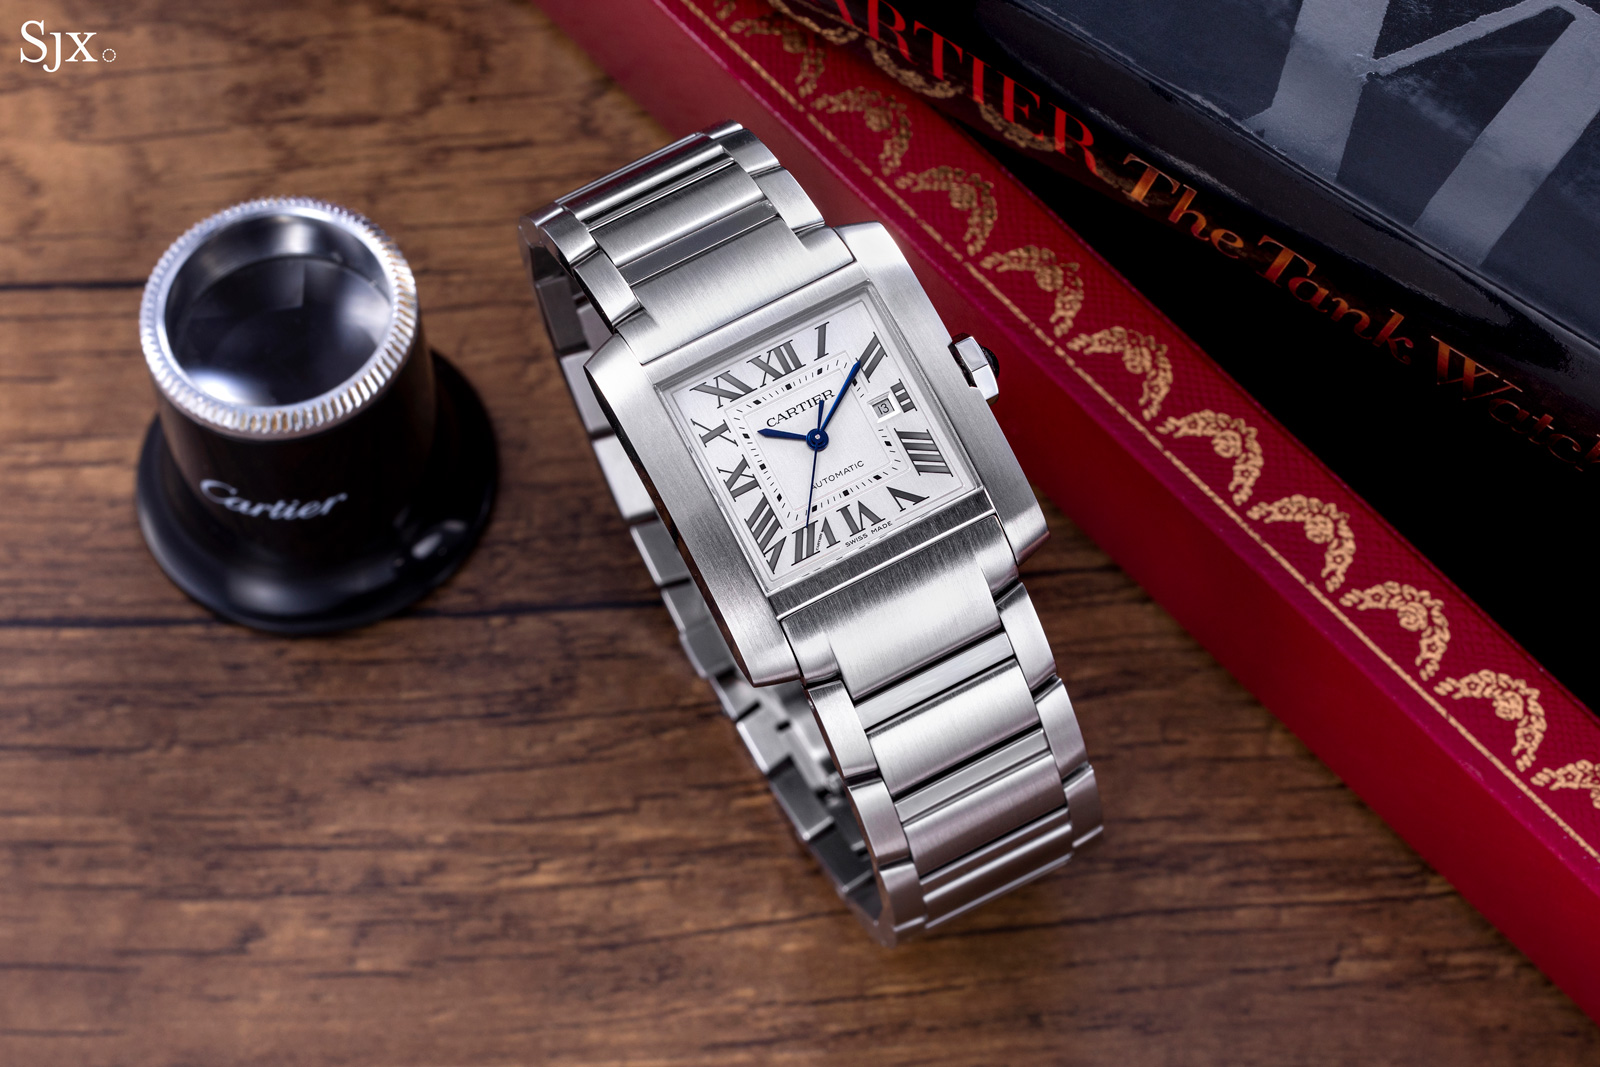 Is this Cartier Tank Louis Cartier too small?